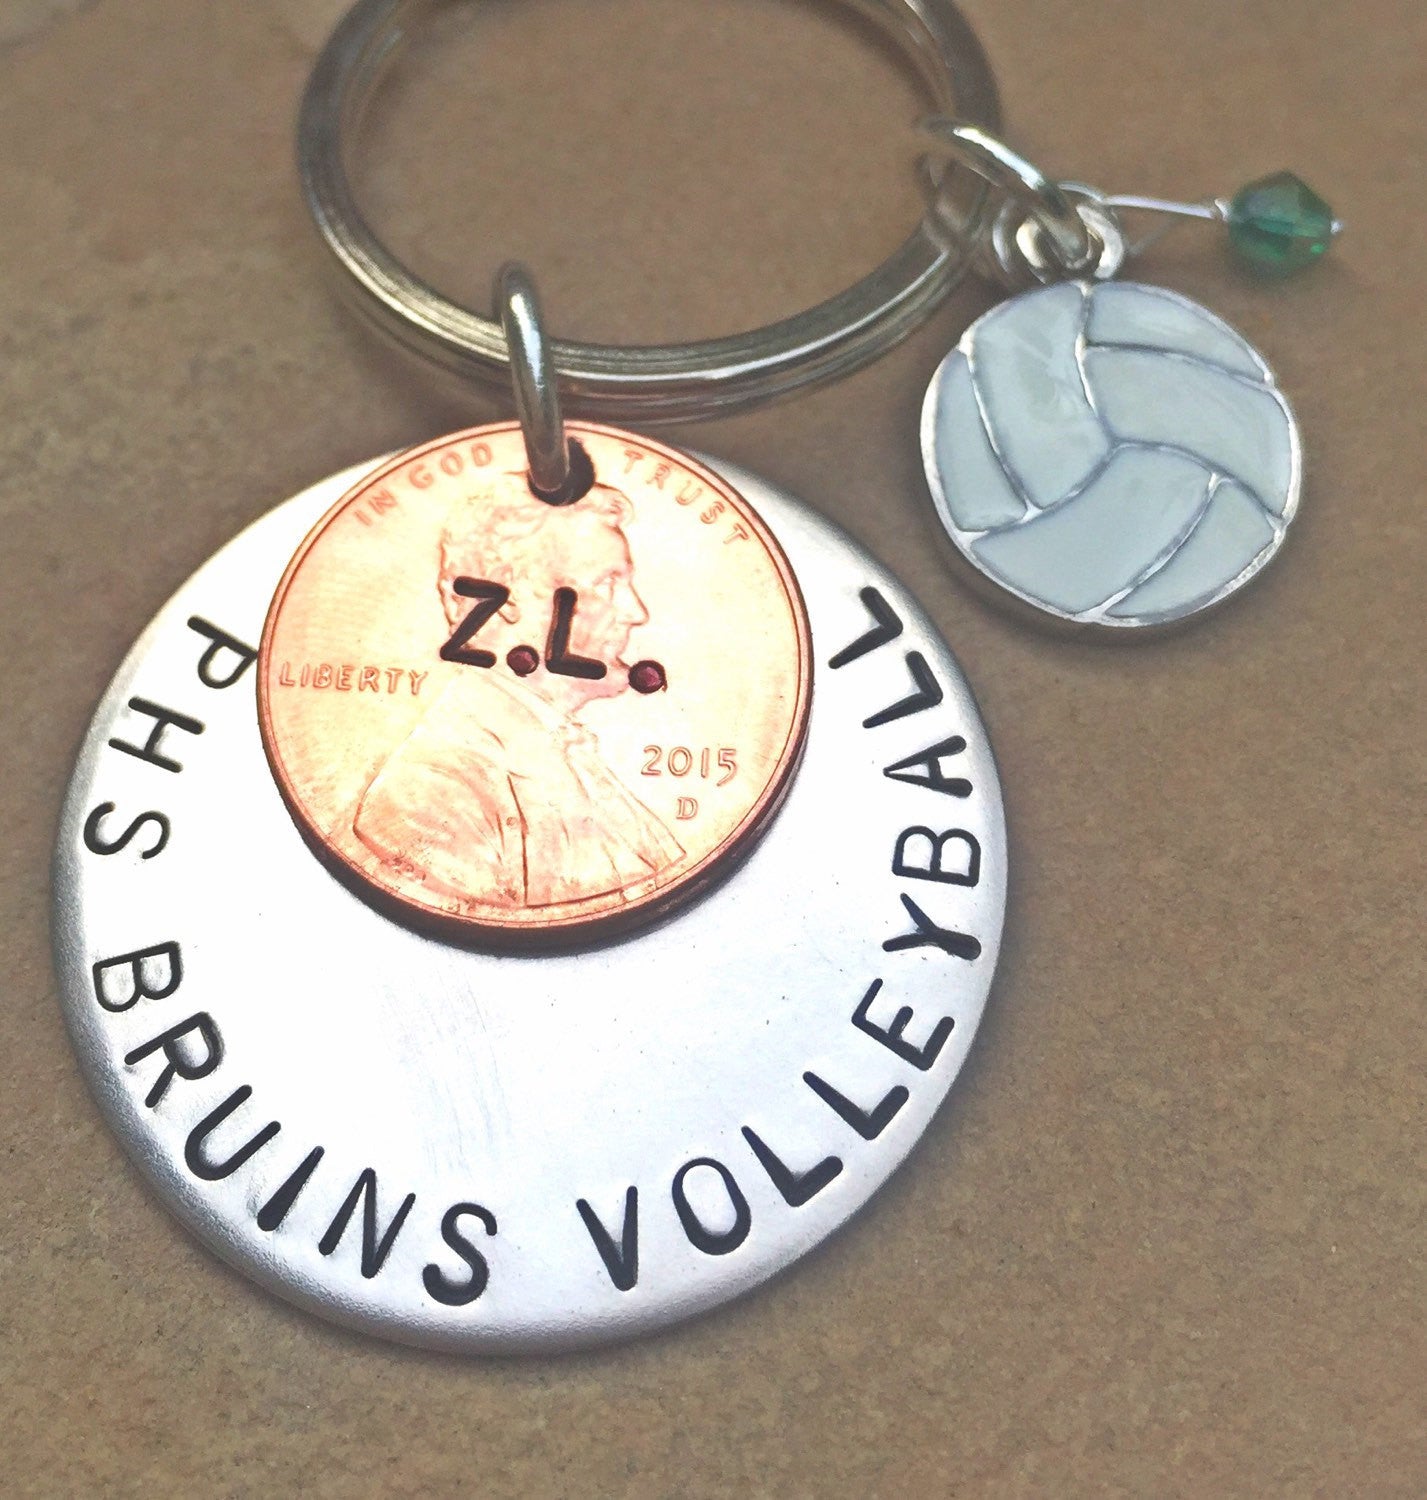 High School Gifts, Christmas Gift, High School Sports Keychain, Volleyball Keychain, Personalized High School Sport Keychain, Football - Natashaaloha, jewelry, bracelets, necklace, keychains, fishing lures, gifts for men, charms, personalized, 